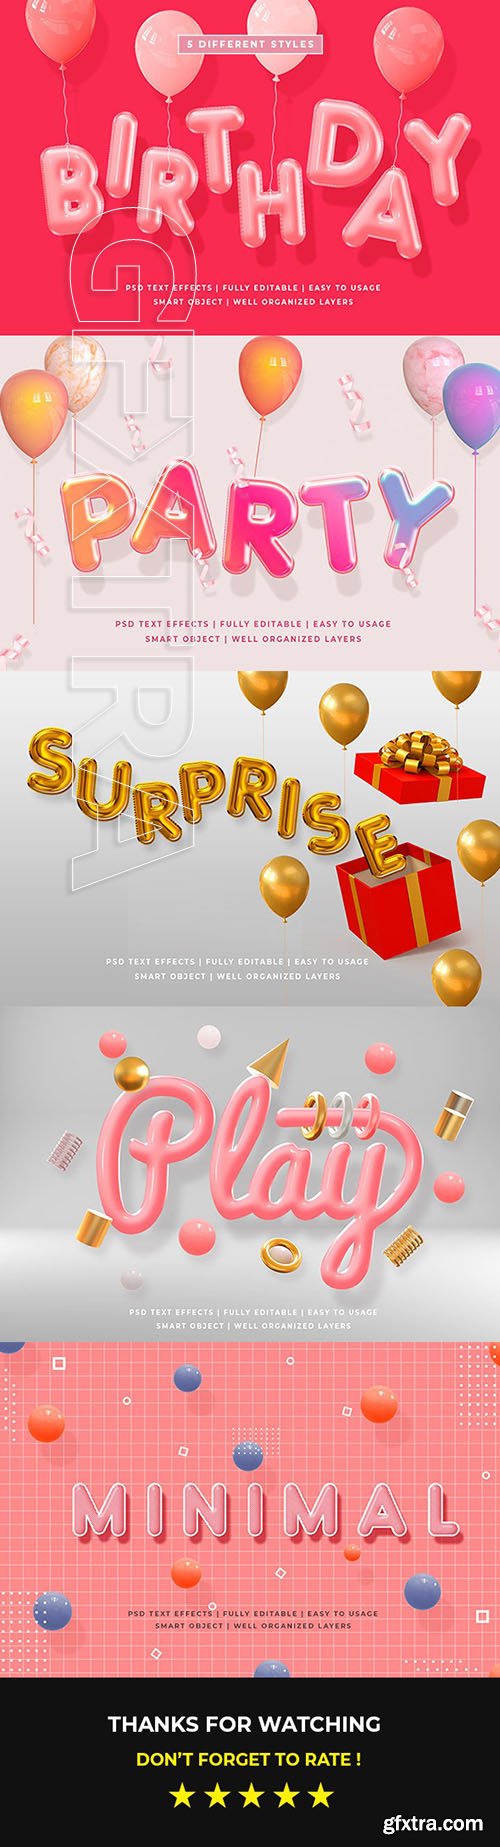 Graphicriver - Birthday Party 3d Text Style Effect Mockup 25633246